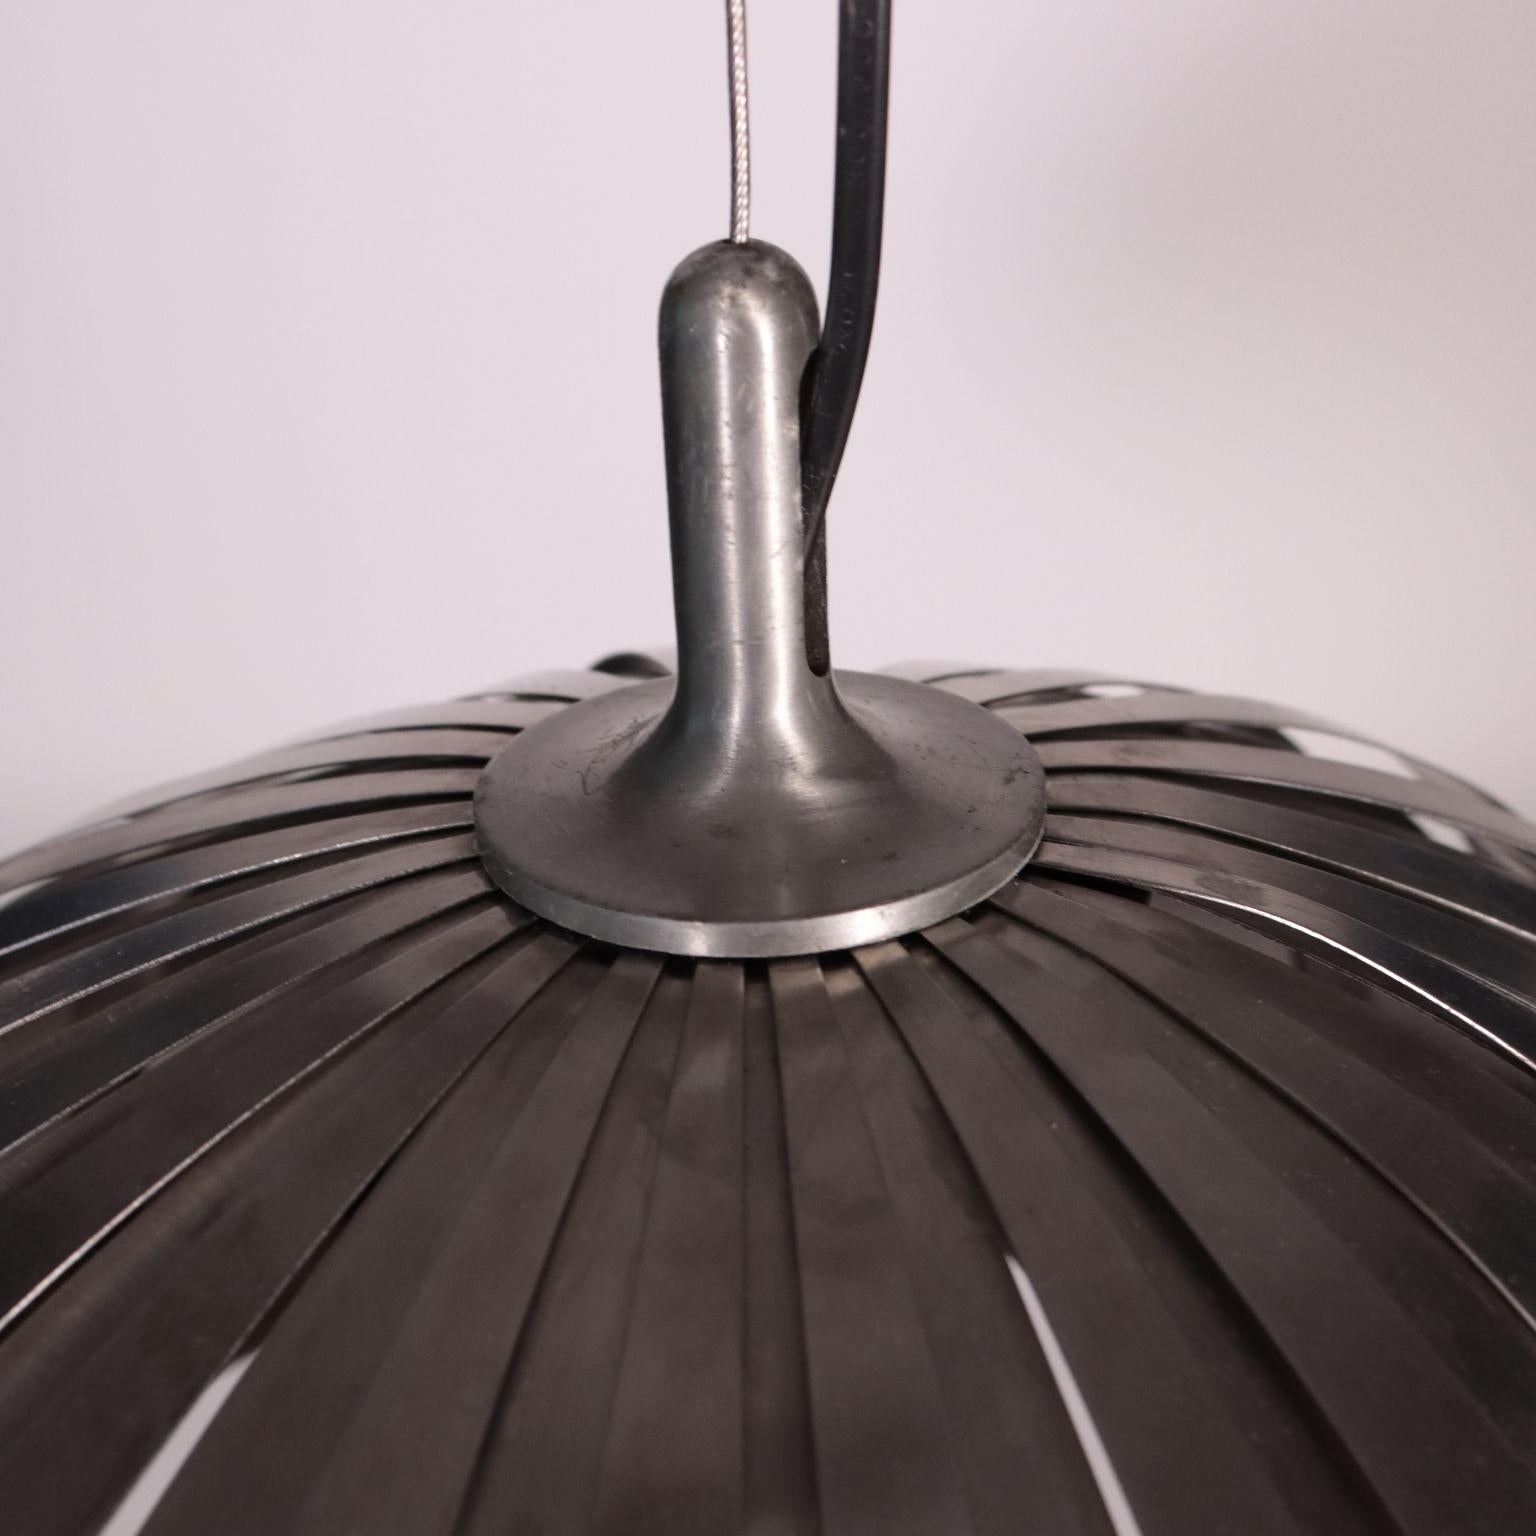 Lamp Elio Martinelli Chromed Metal, Italy, 1960s 1970s For Sale 2